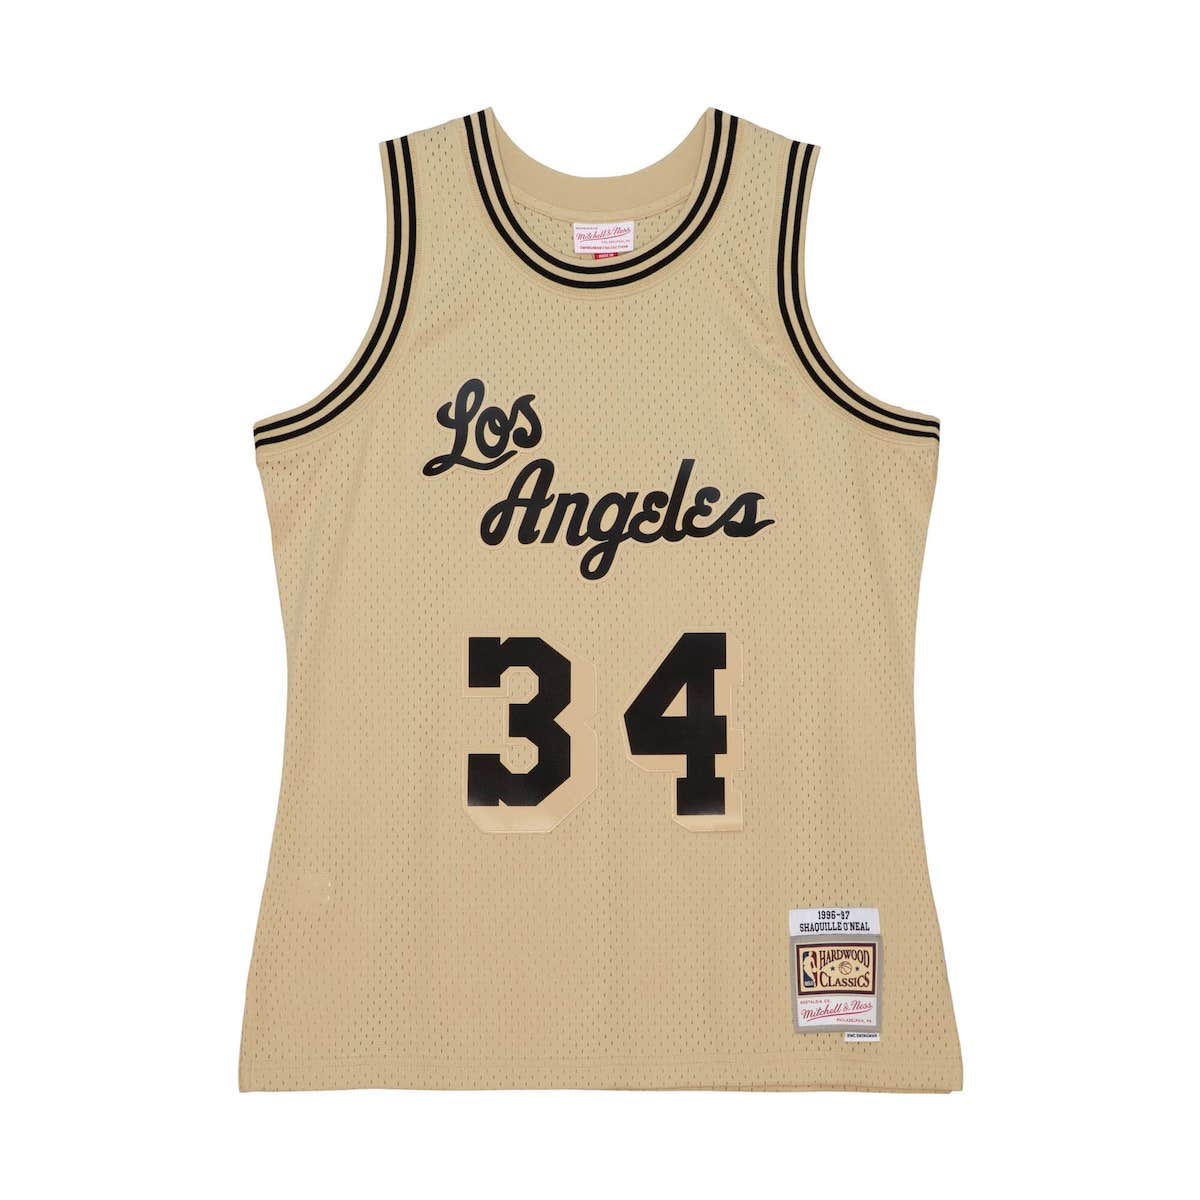 shaquille o neal black lakers jersey